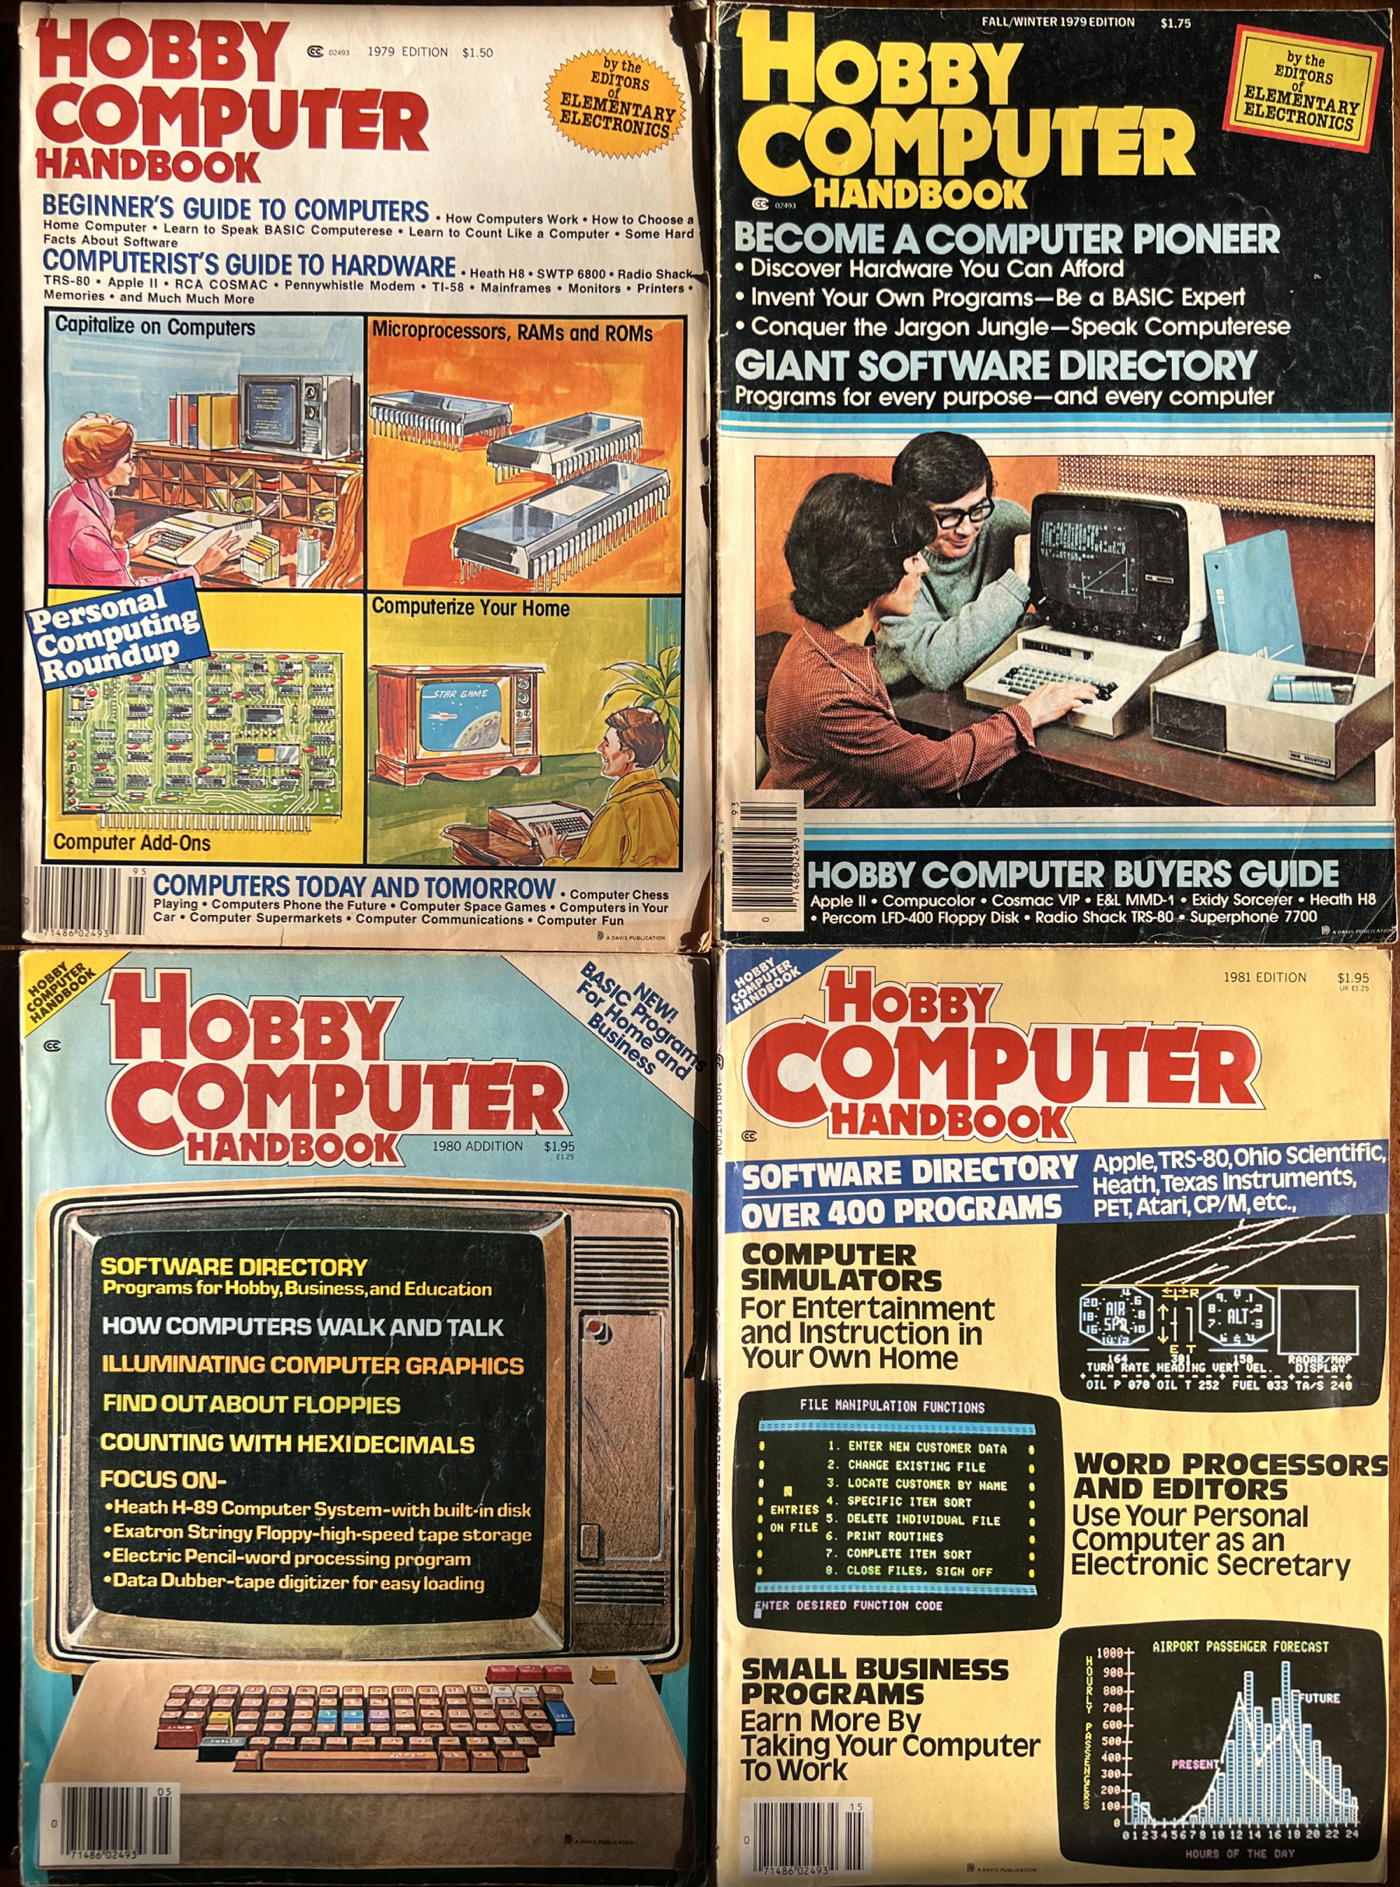 Four covers of Hobby Computer Handbook: All? four covers of the Hobby Computer Handbook magazines.; magazines; computer history; Hobby Computer Handbook